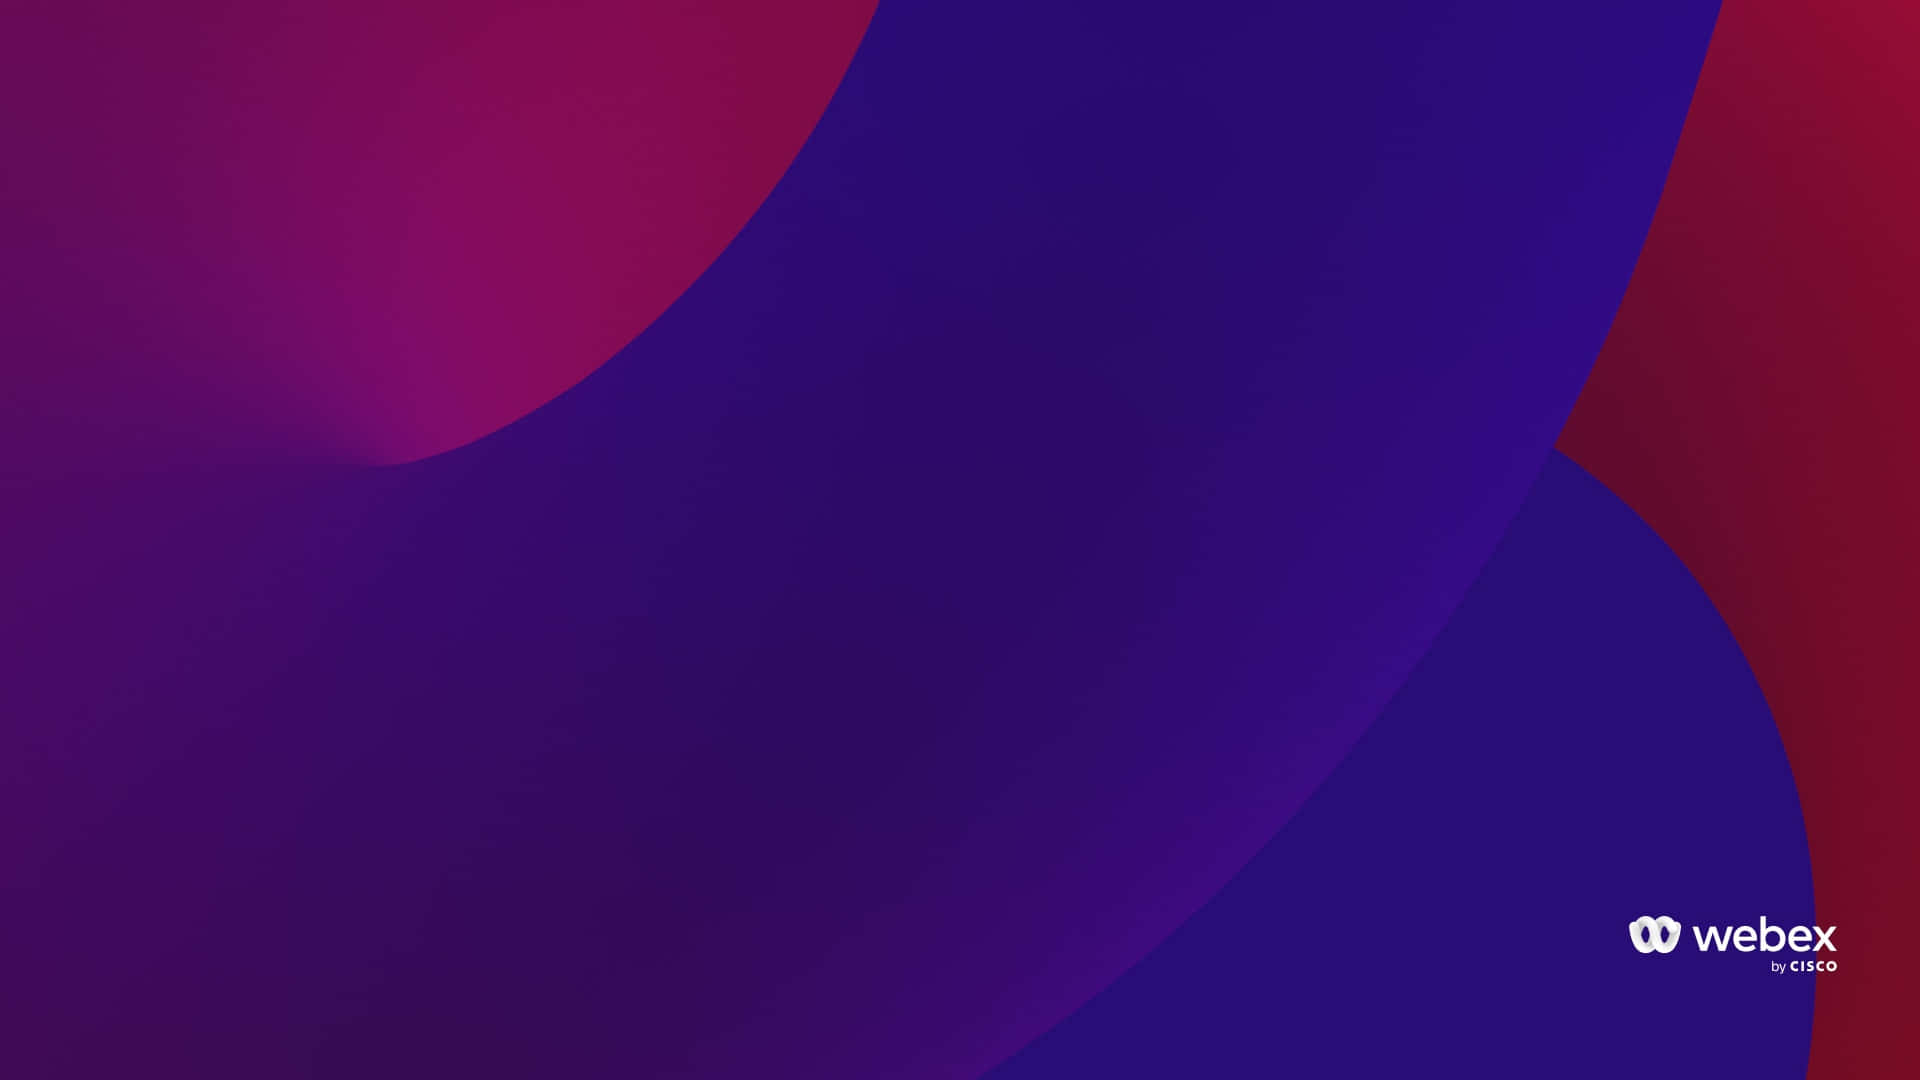 A Purple And Red Abstract Background